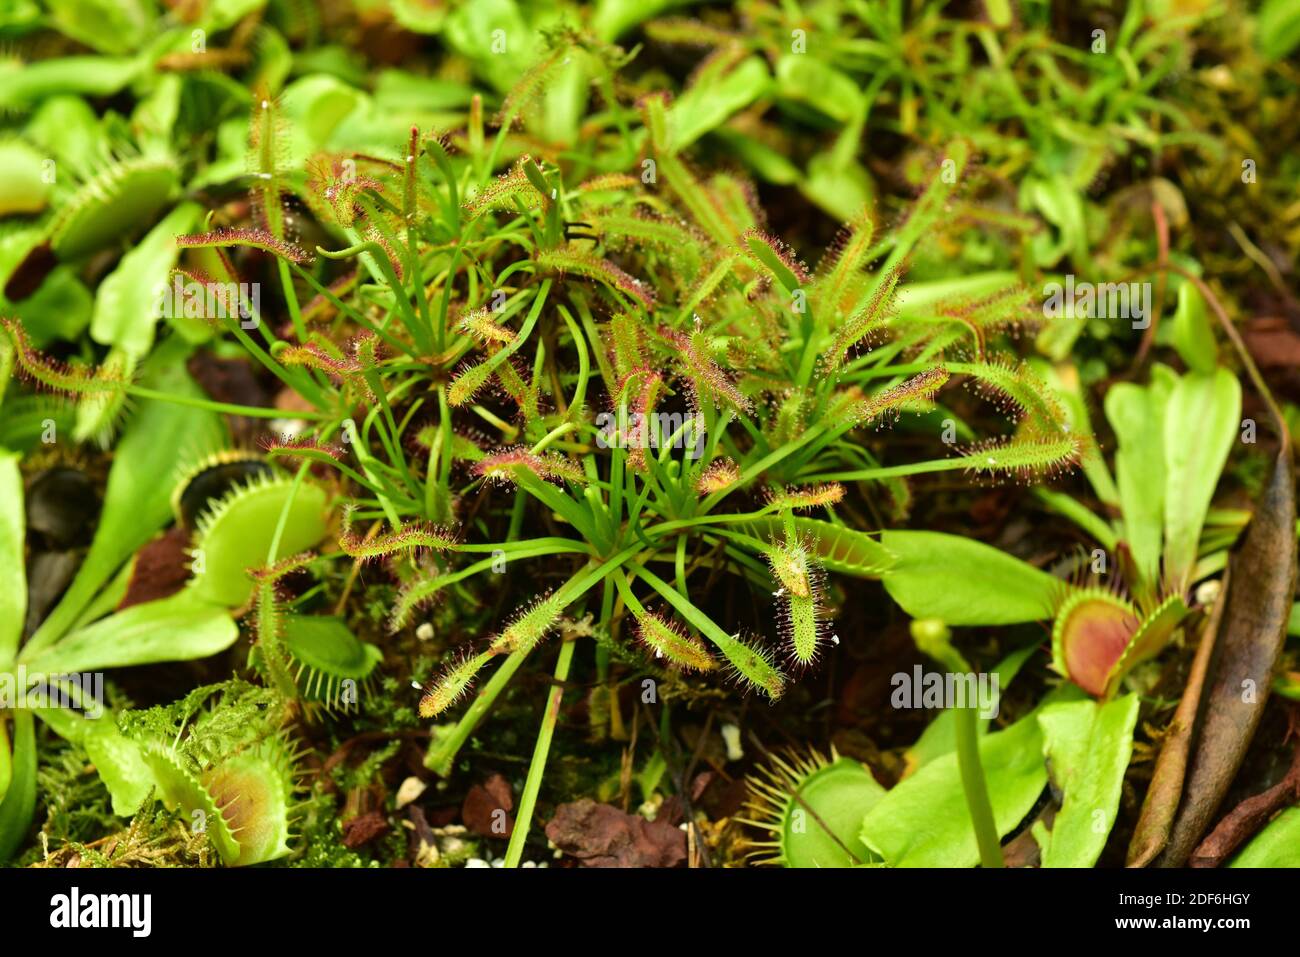 Cape sundew (Drosera capensis) carnivorous plant native to the Cape, South Africa, and Venus flytrap (Dionaea muscipula) another carnivorous plant Stock Photo